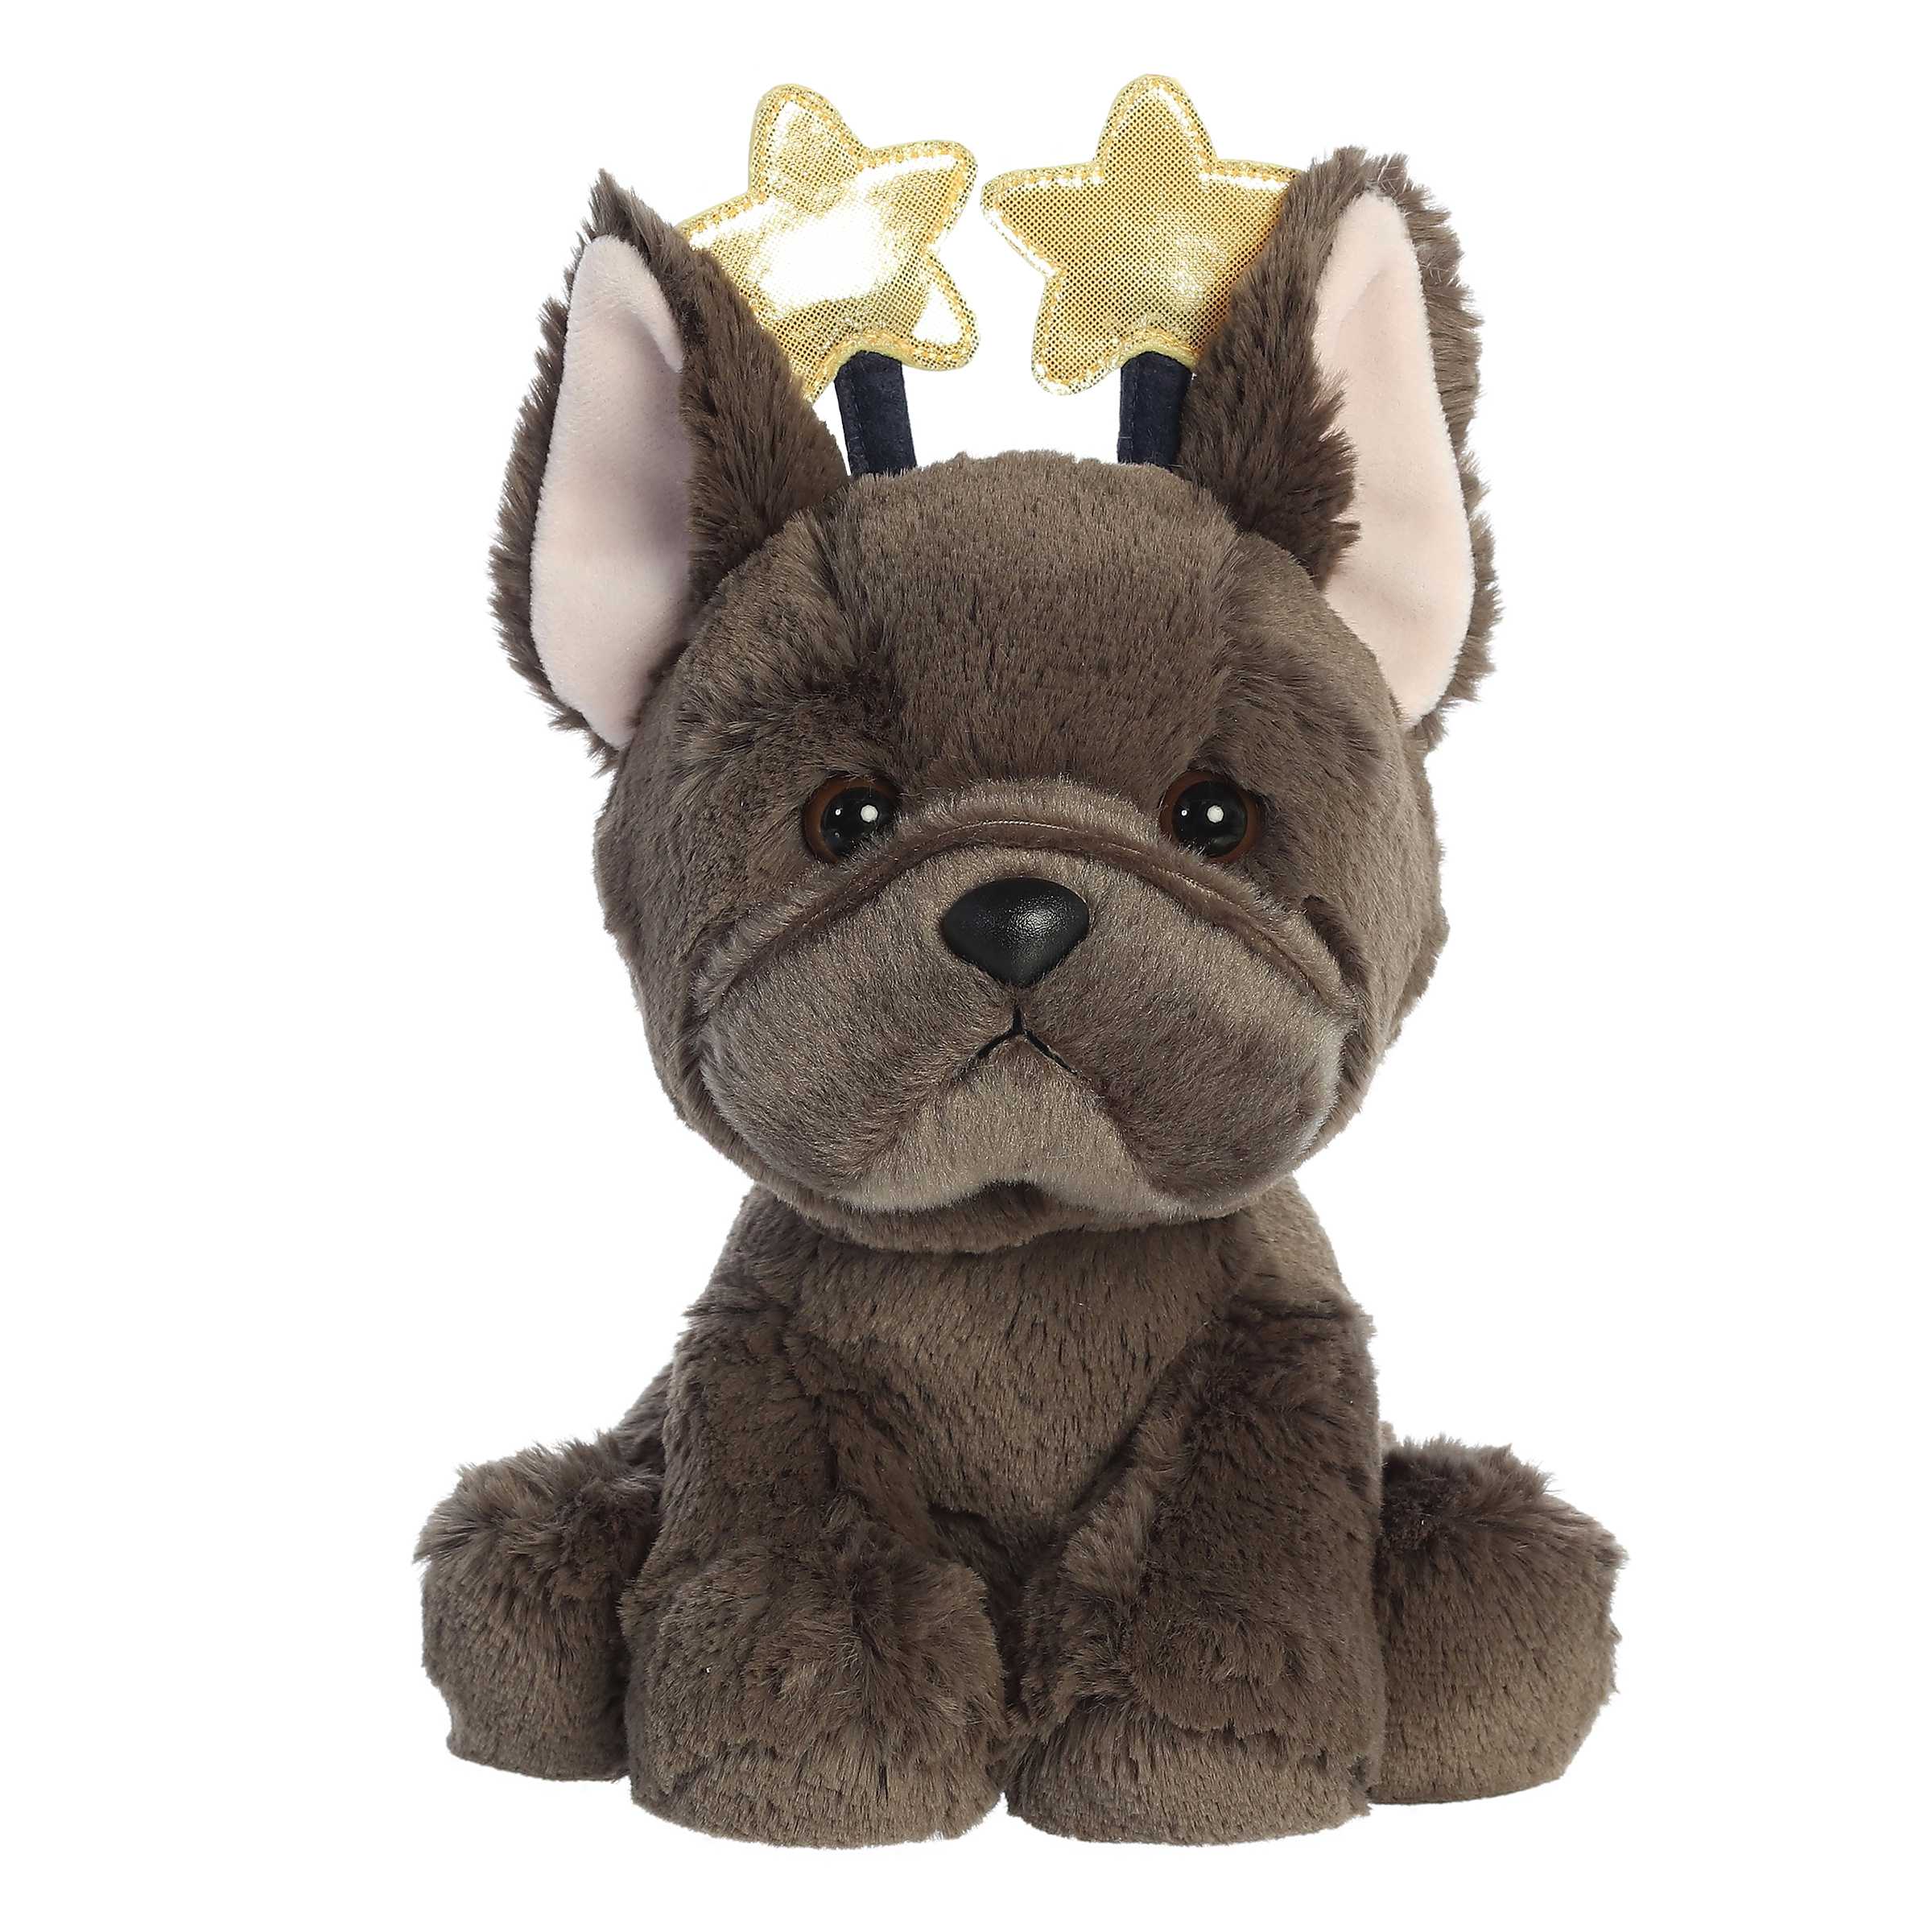 Adorable black French Bulldog in a sitting position wearing a star antenna headband